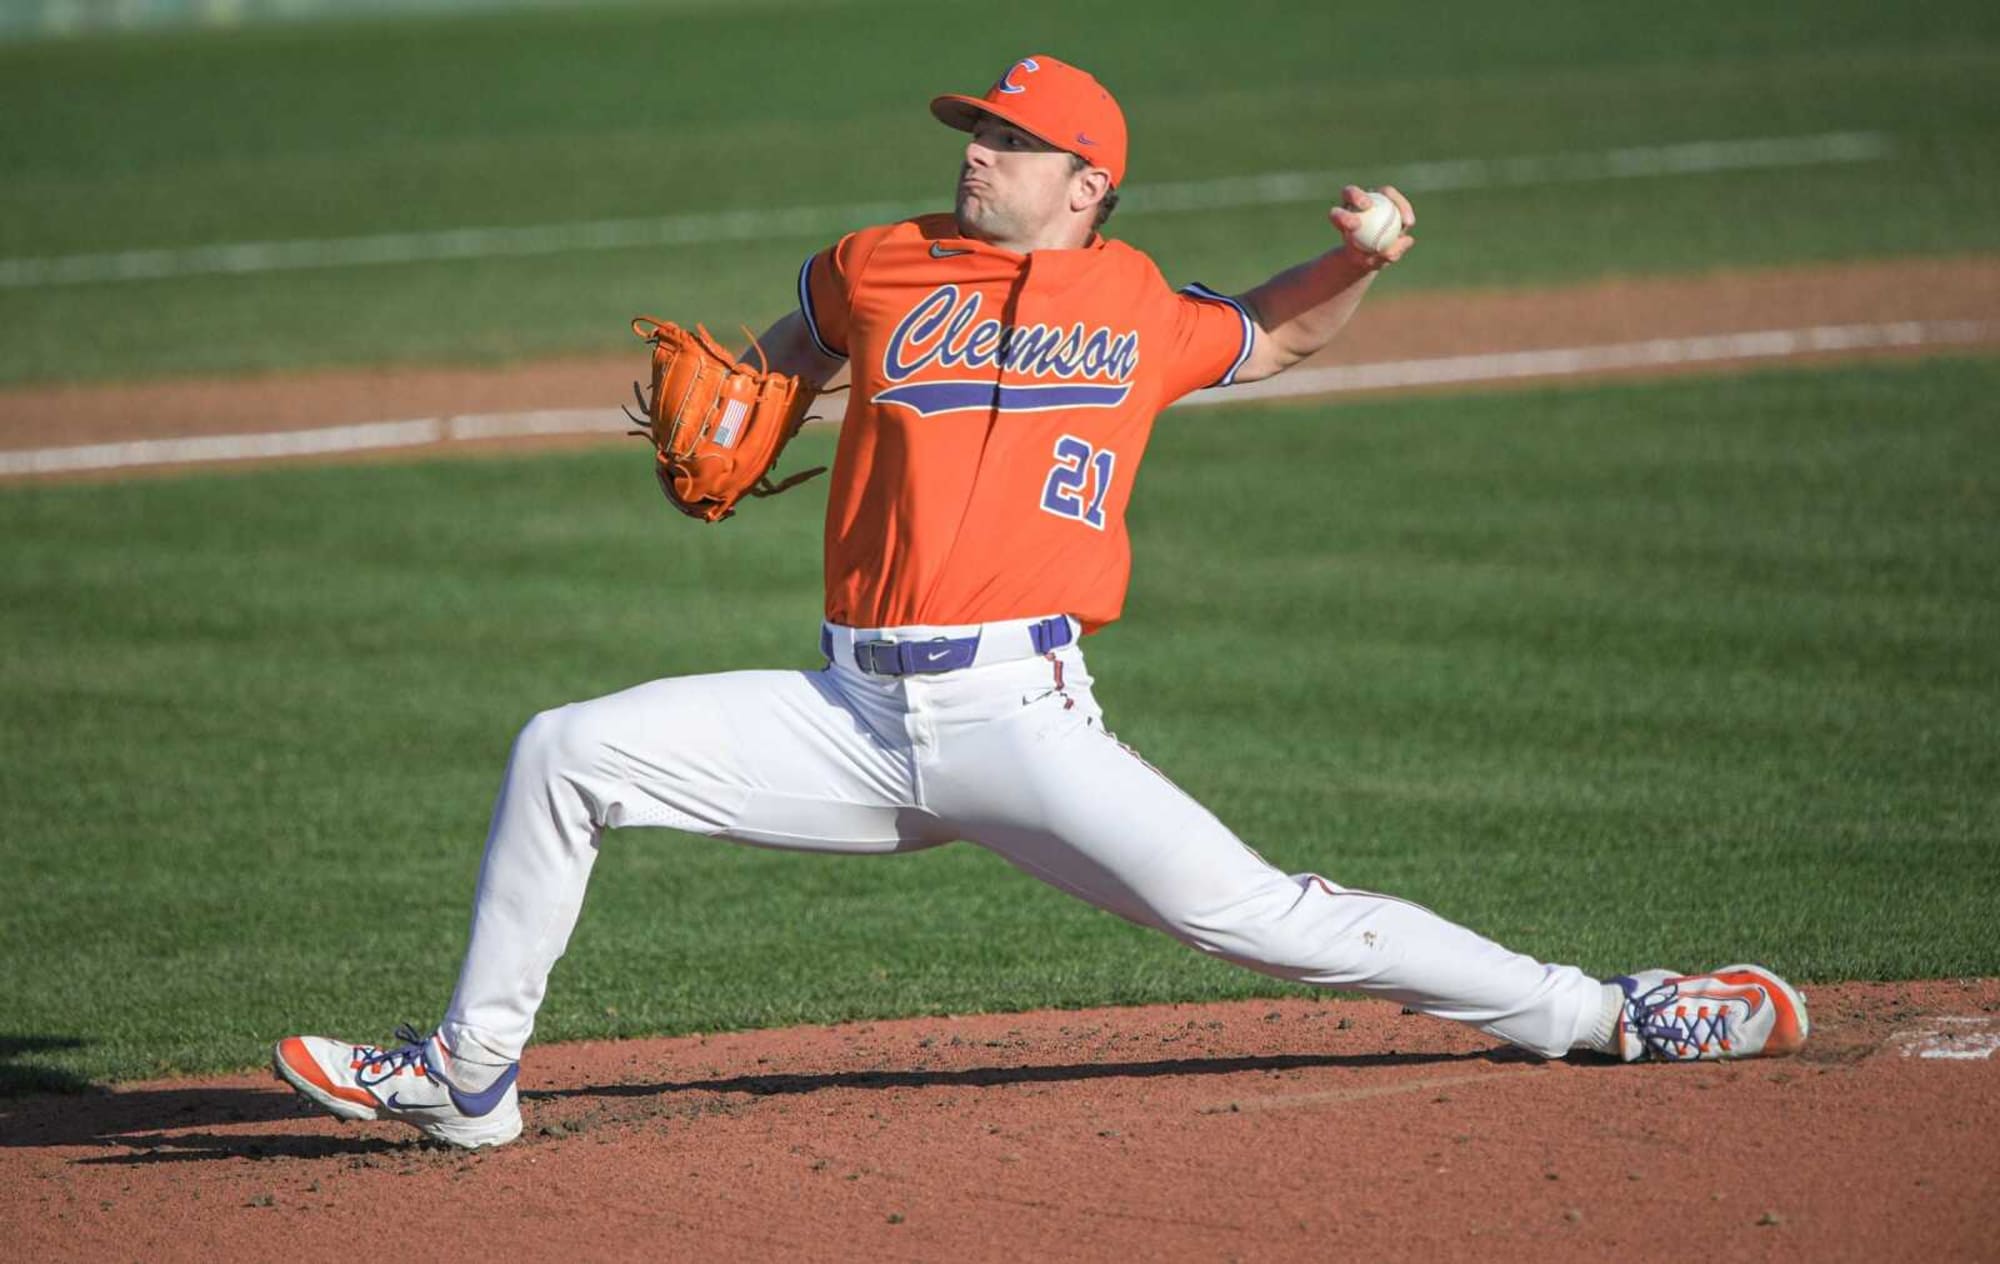 Clemson Baseball Opponent Preview Charlotte 49ers visit Tigers